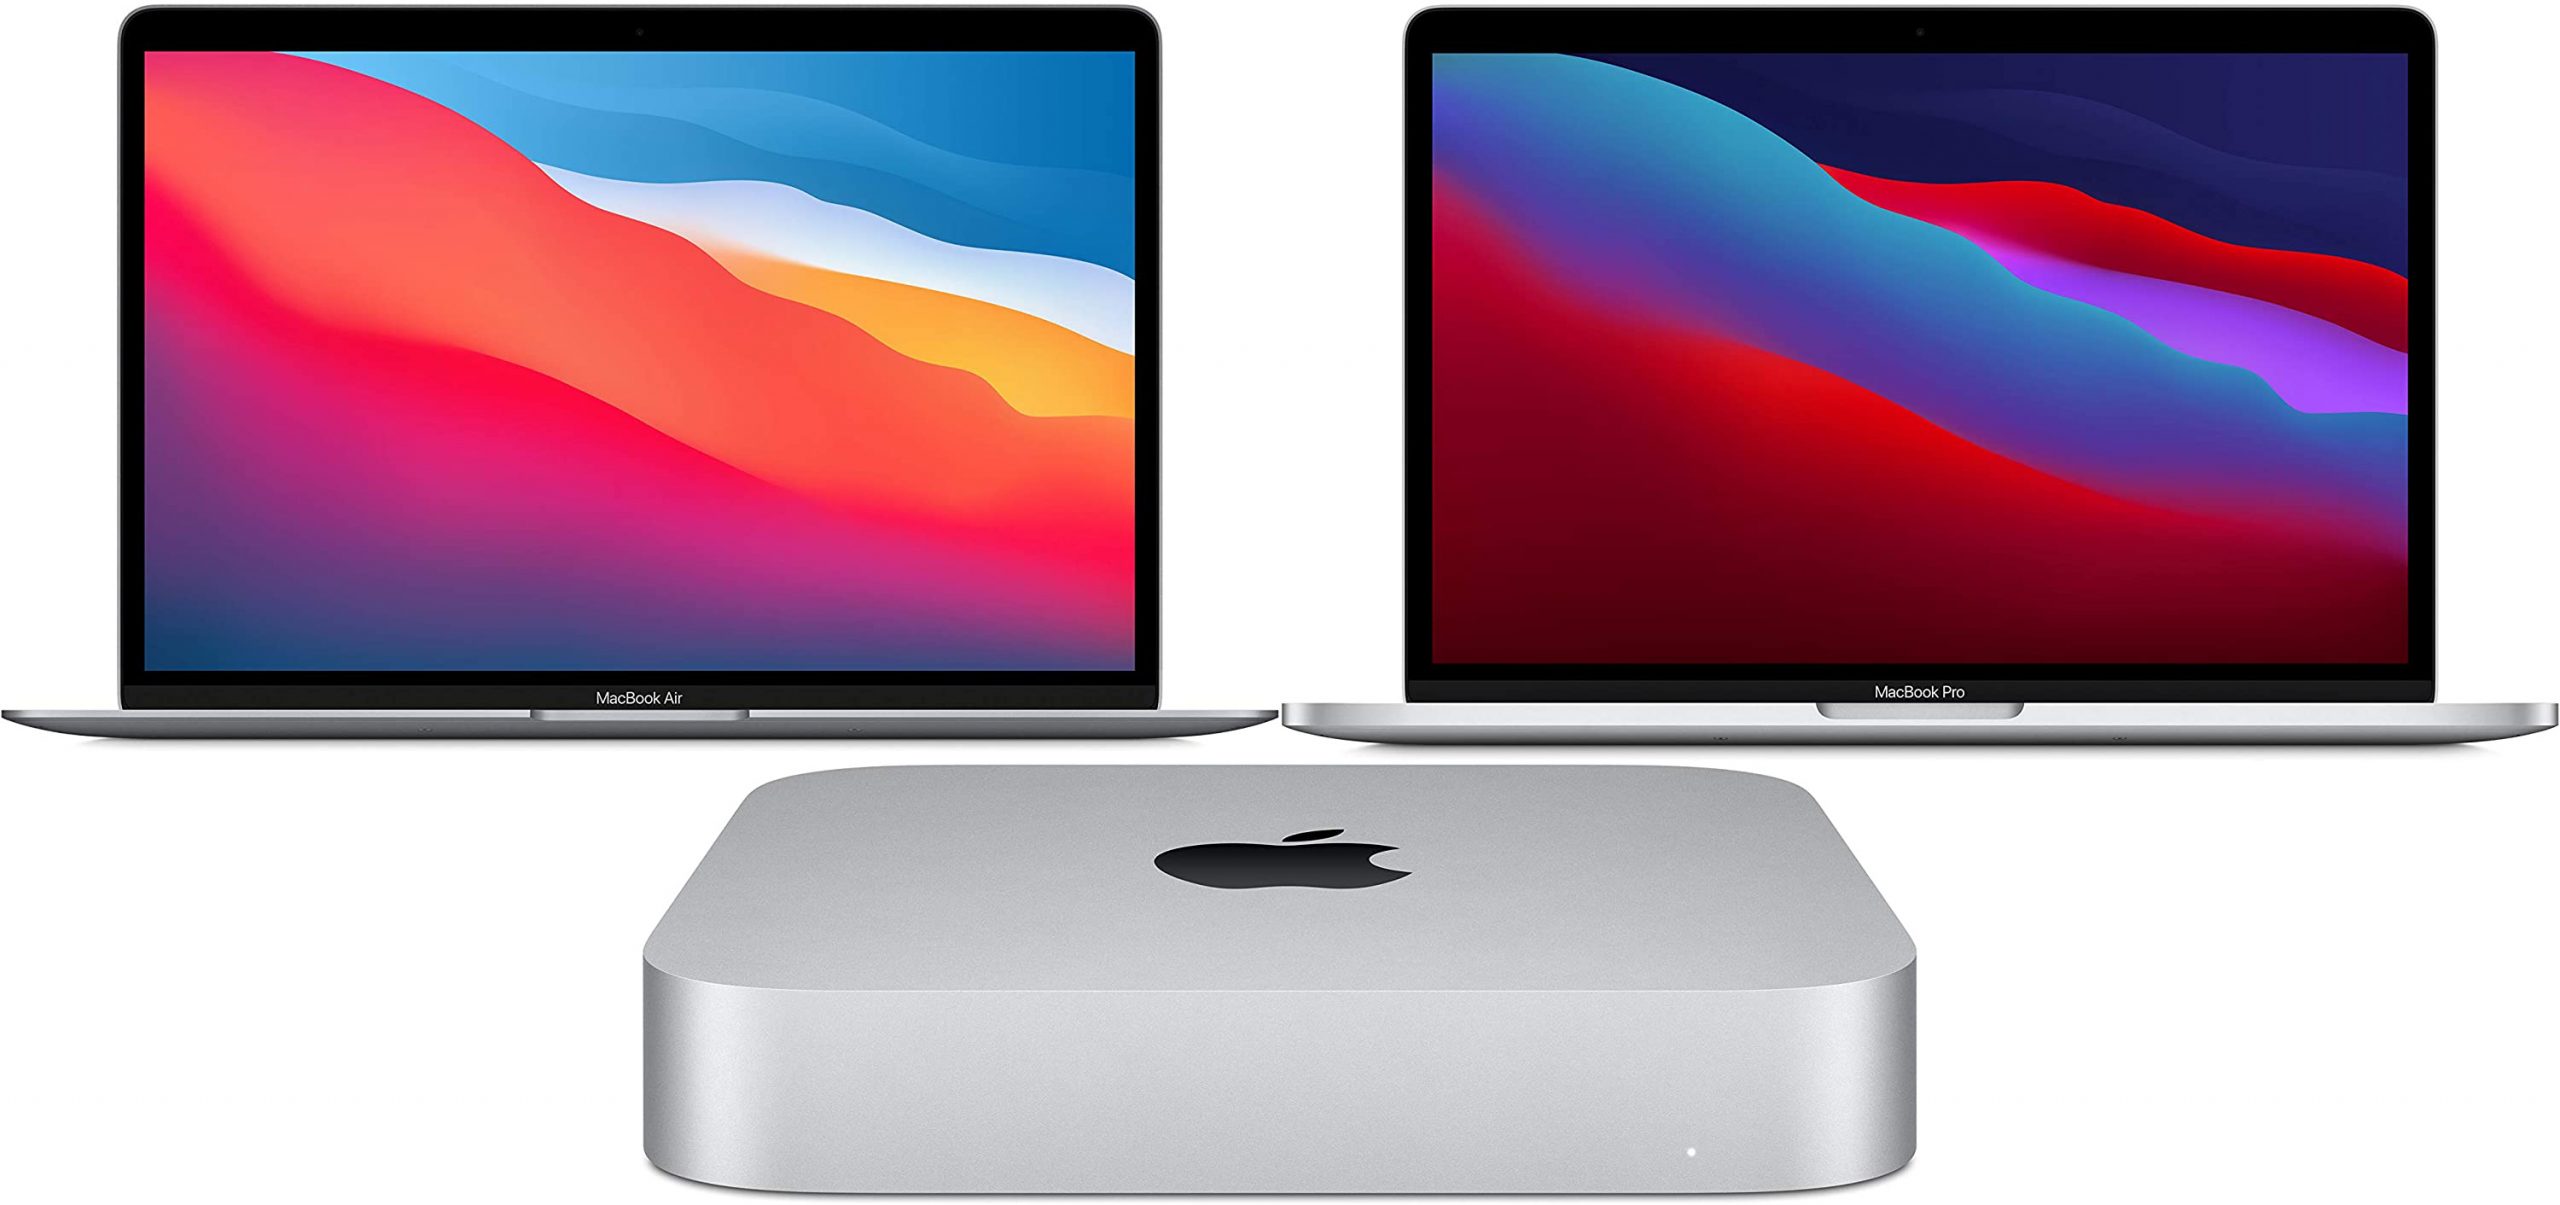 Save up to $150 on the M1 Mac mini, MacBook Air and MacBook Pro